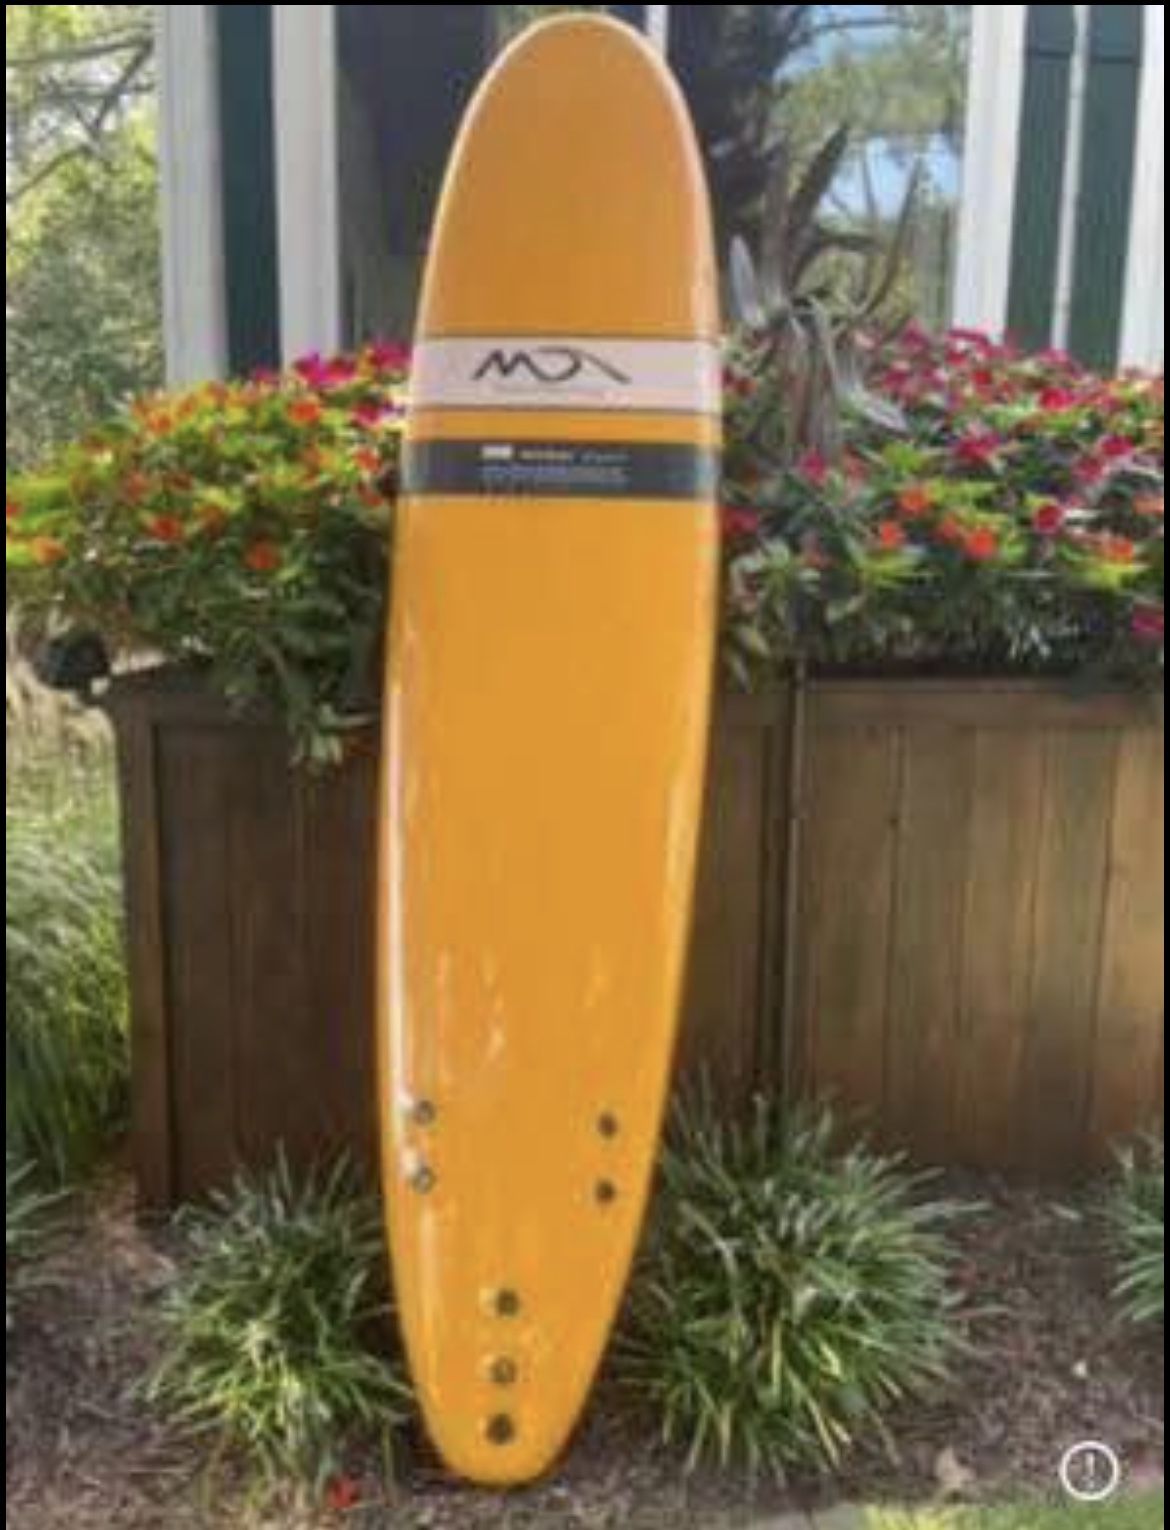 New 8’0 Softtop surfboard! 